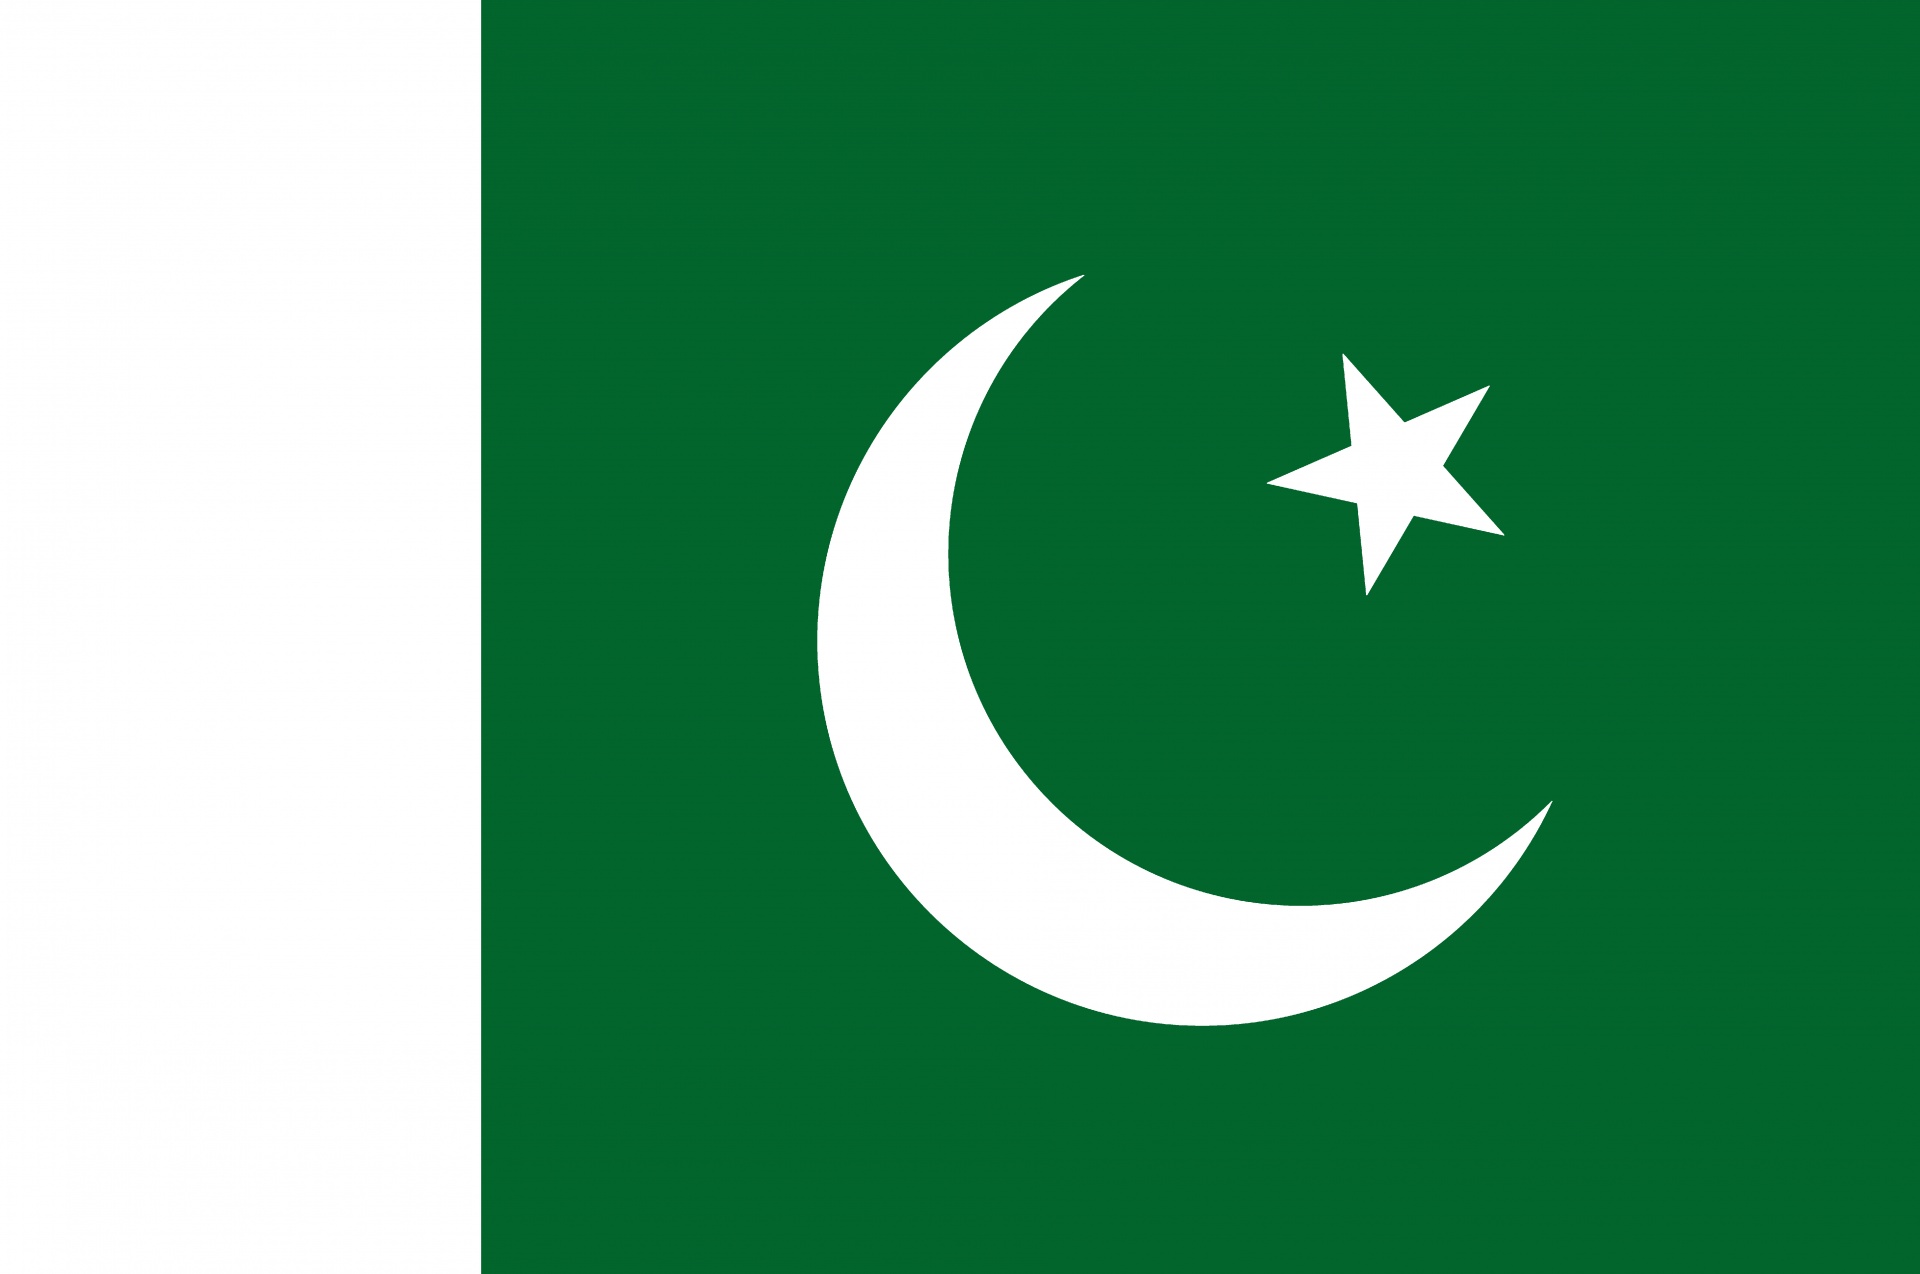 The national flag of Pakistan was adopted in its present form during a meeting of the Constituent Assembly on August 11, 1947, just three days before the country's independence, when it became the official flag of the Dominion of Pakistan.